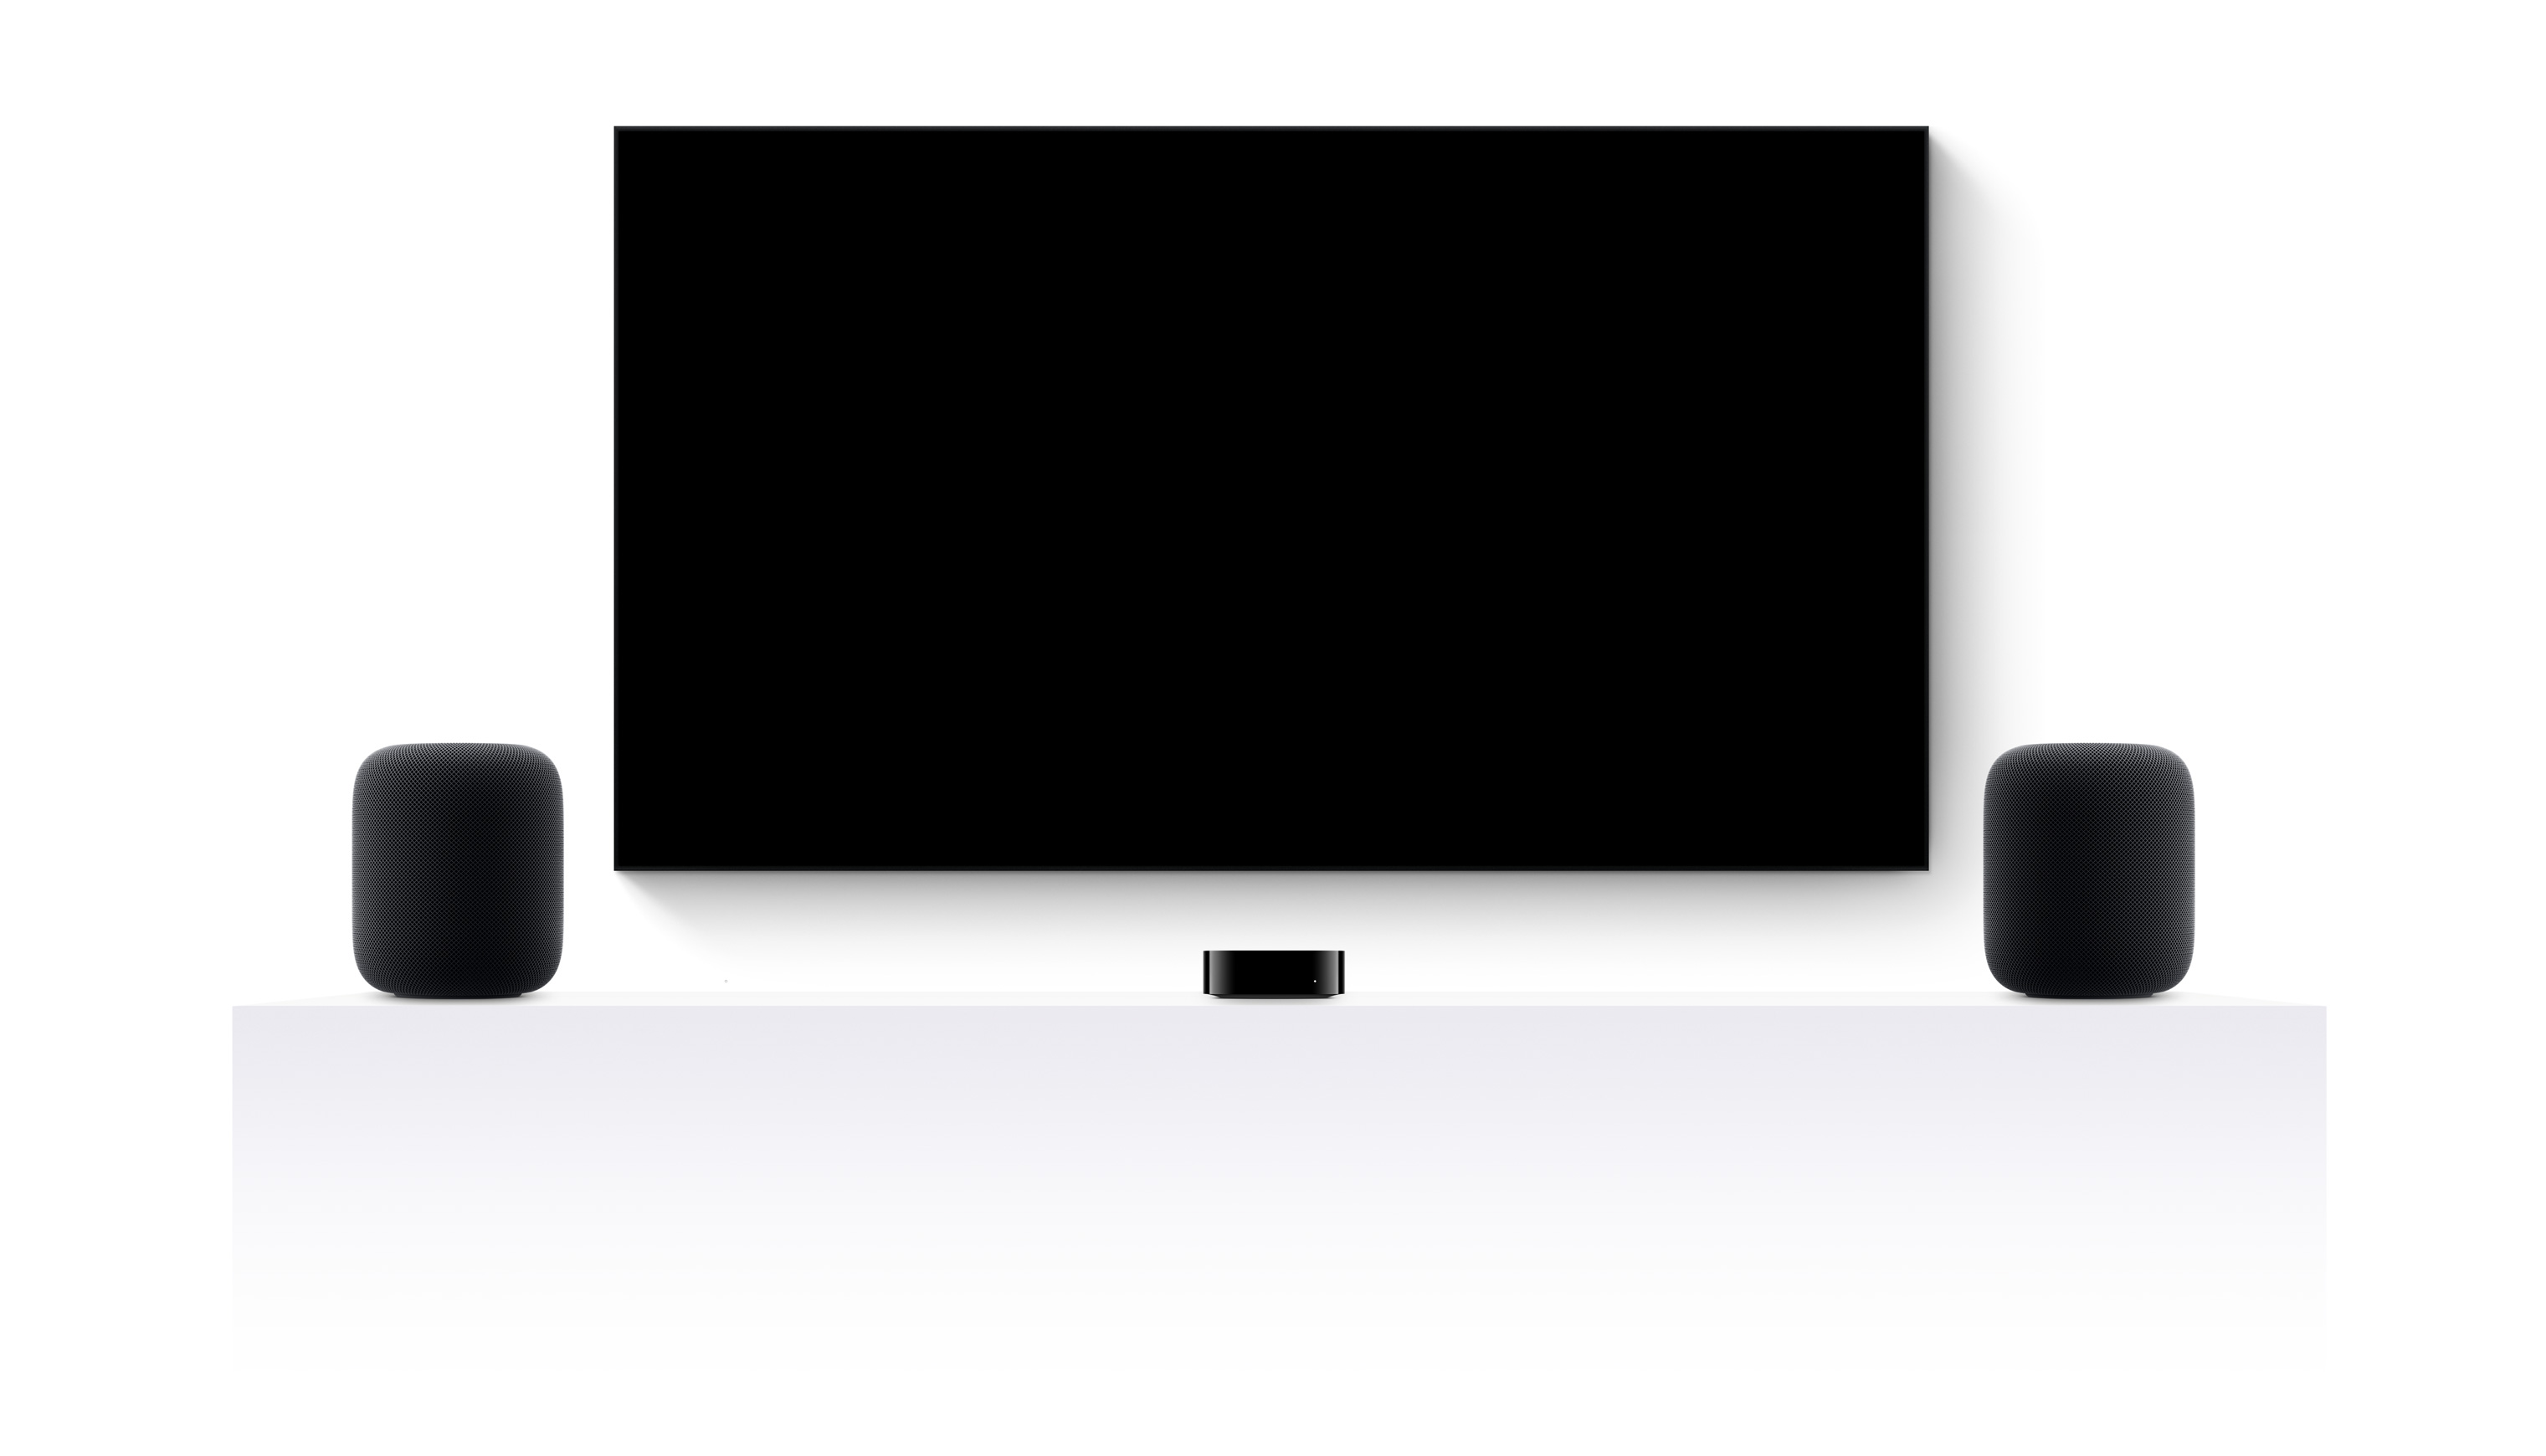 Apple TV 4k, two HomePods and a flatscreen television showing an edited trailer of various Apple TV+ movies and shows